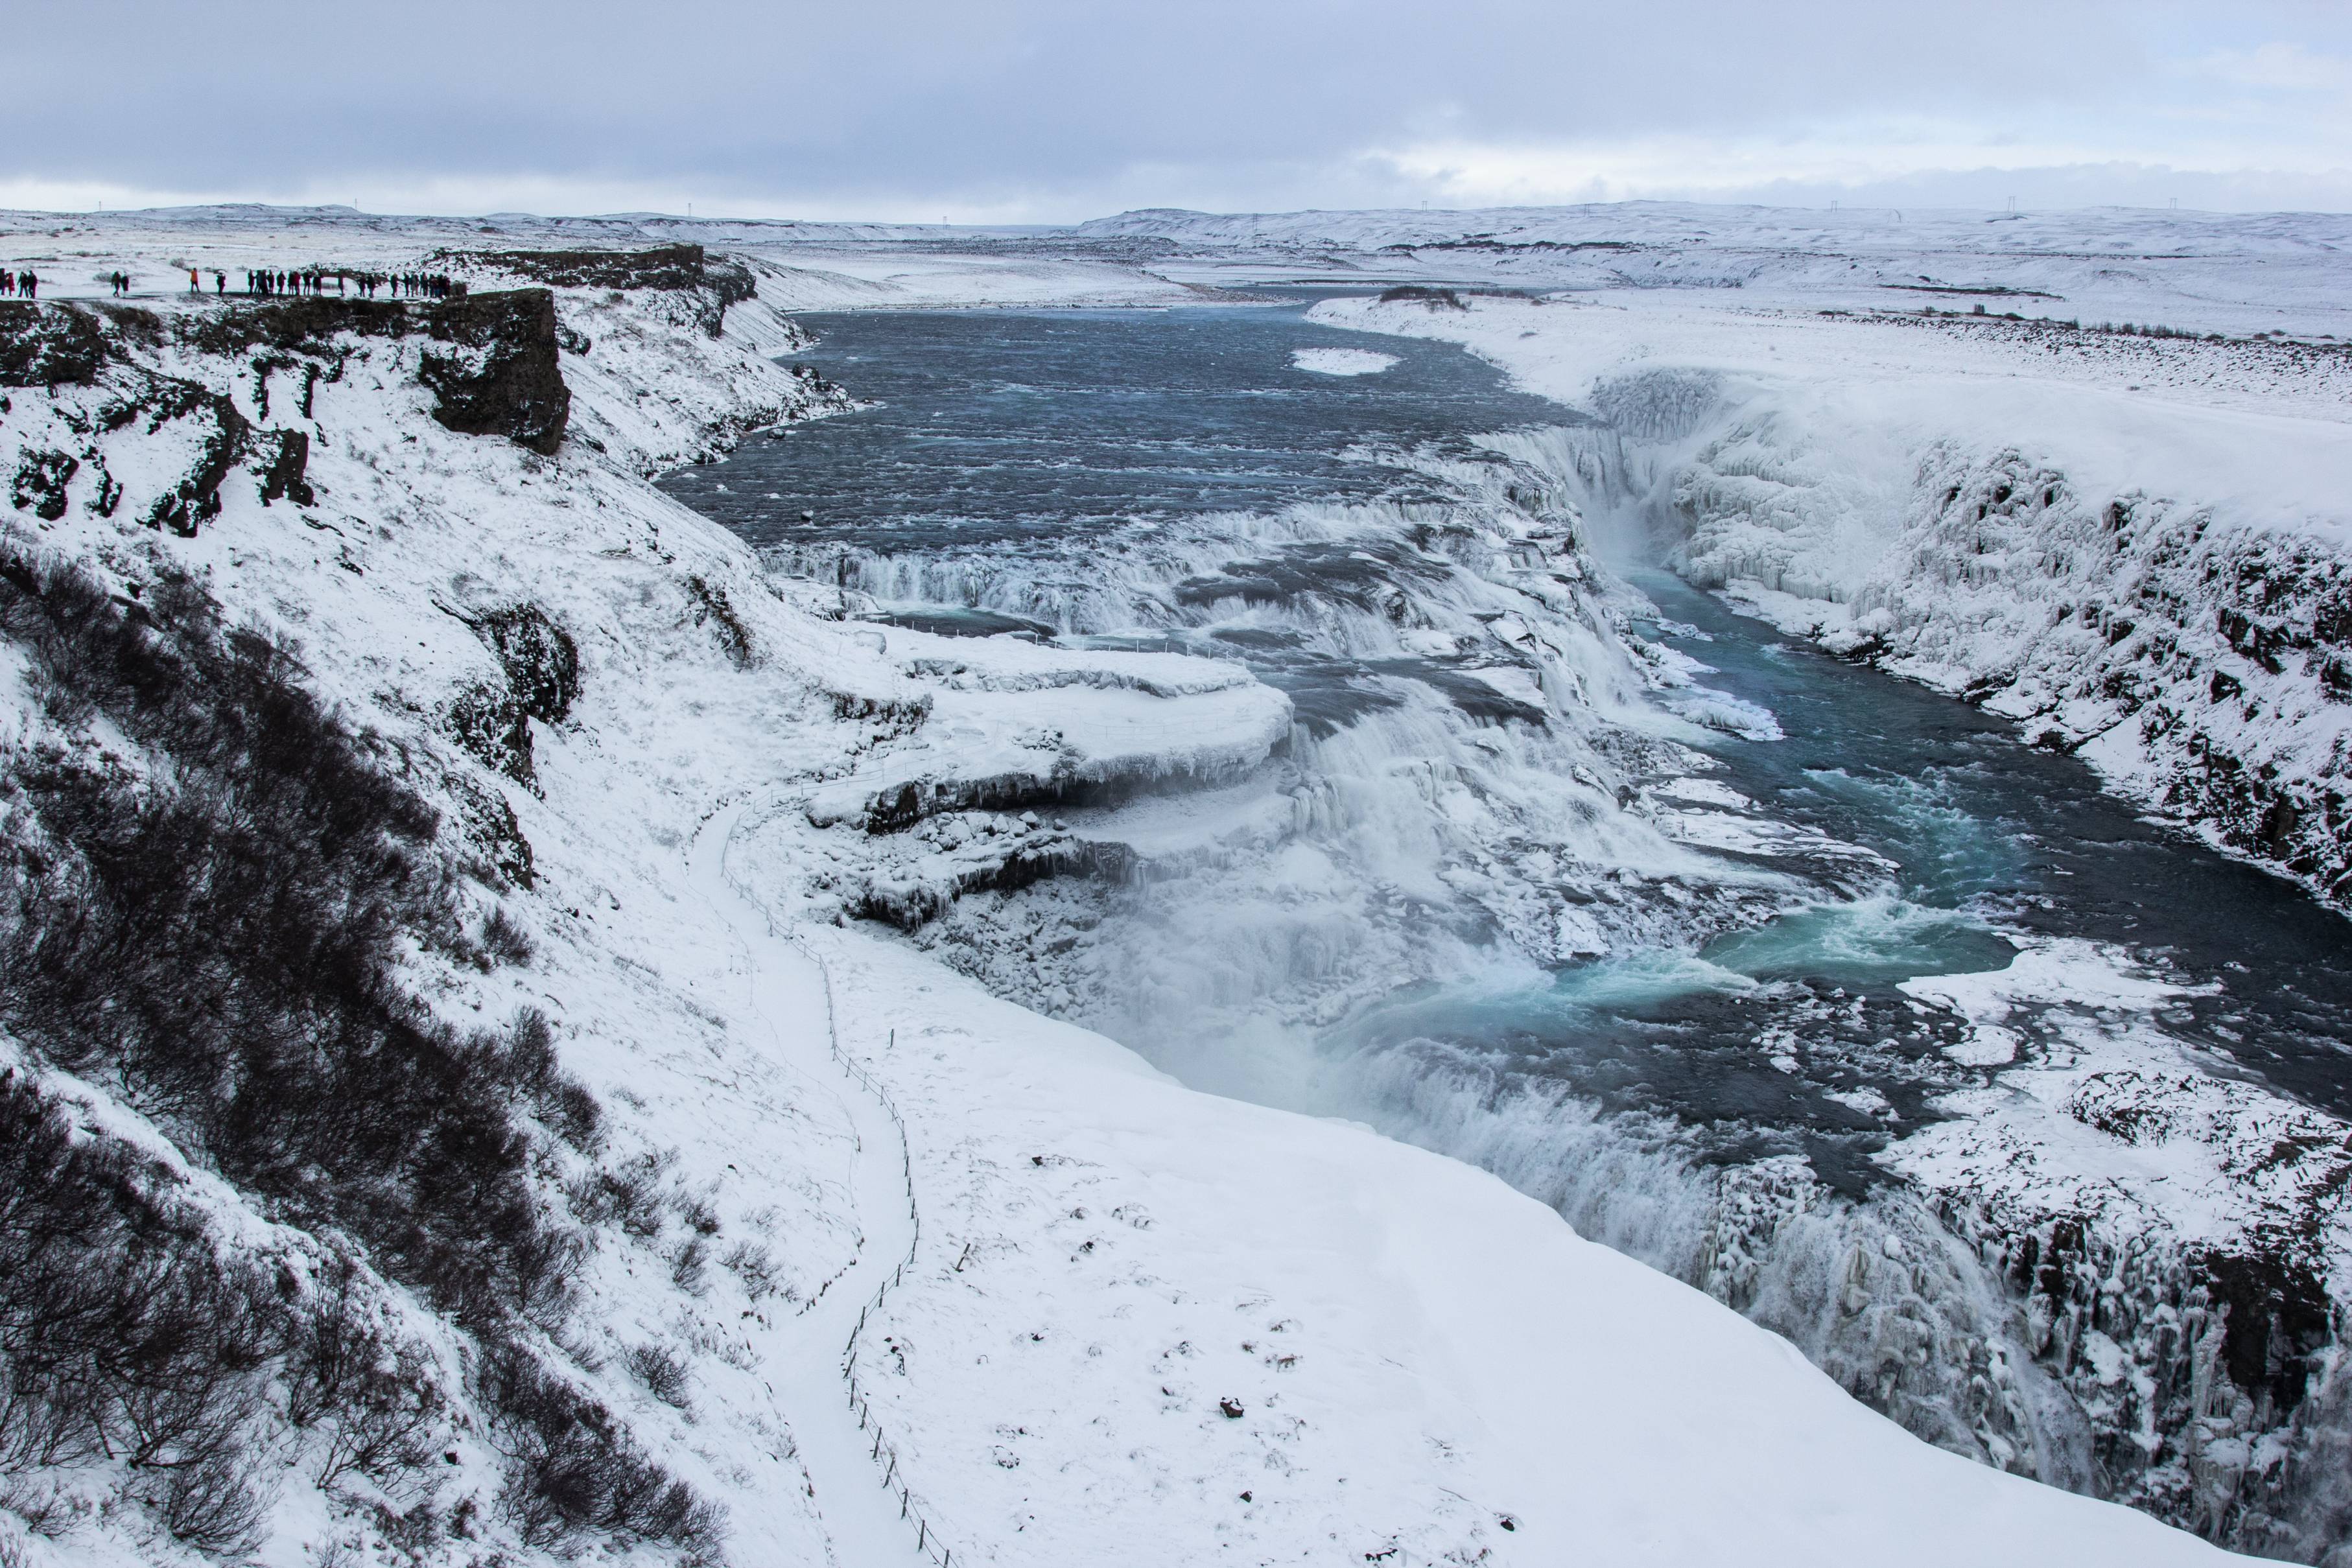 Gullfoss-waterfall-covered-in-snow-with-people-watching-from-a-cliff-side-above-on-the-left